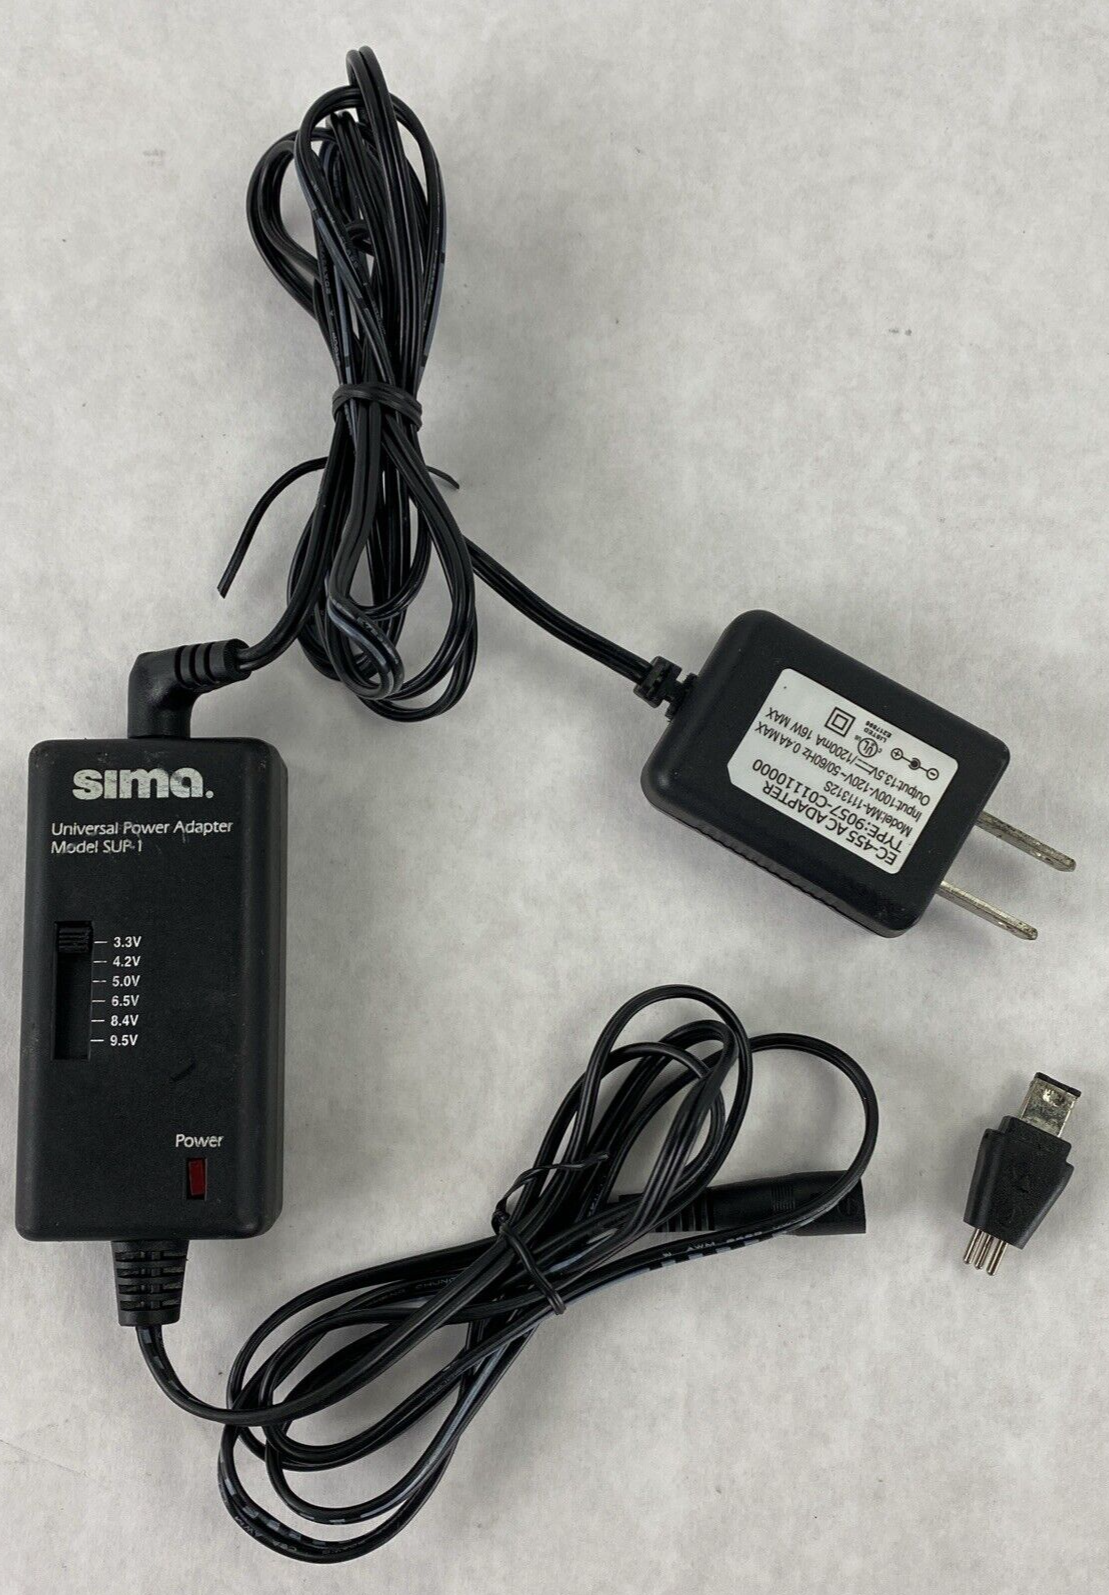 Sima SUP-1 Universal Power Adapter 3.3V to 9.5V with Sony Handycam Adapter